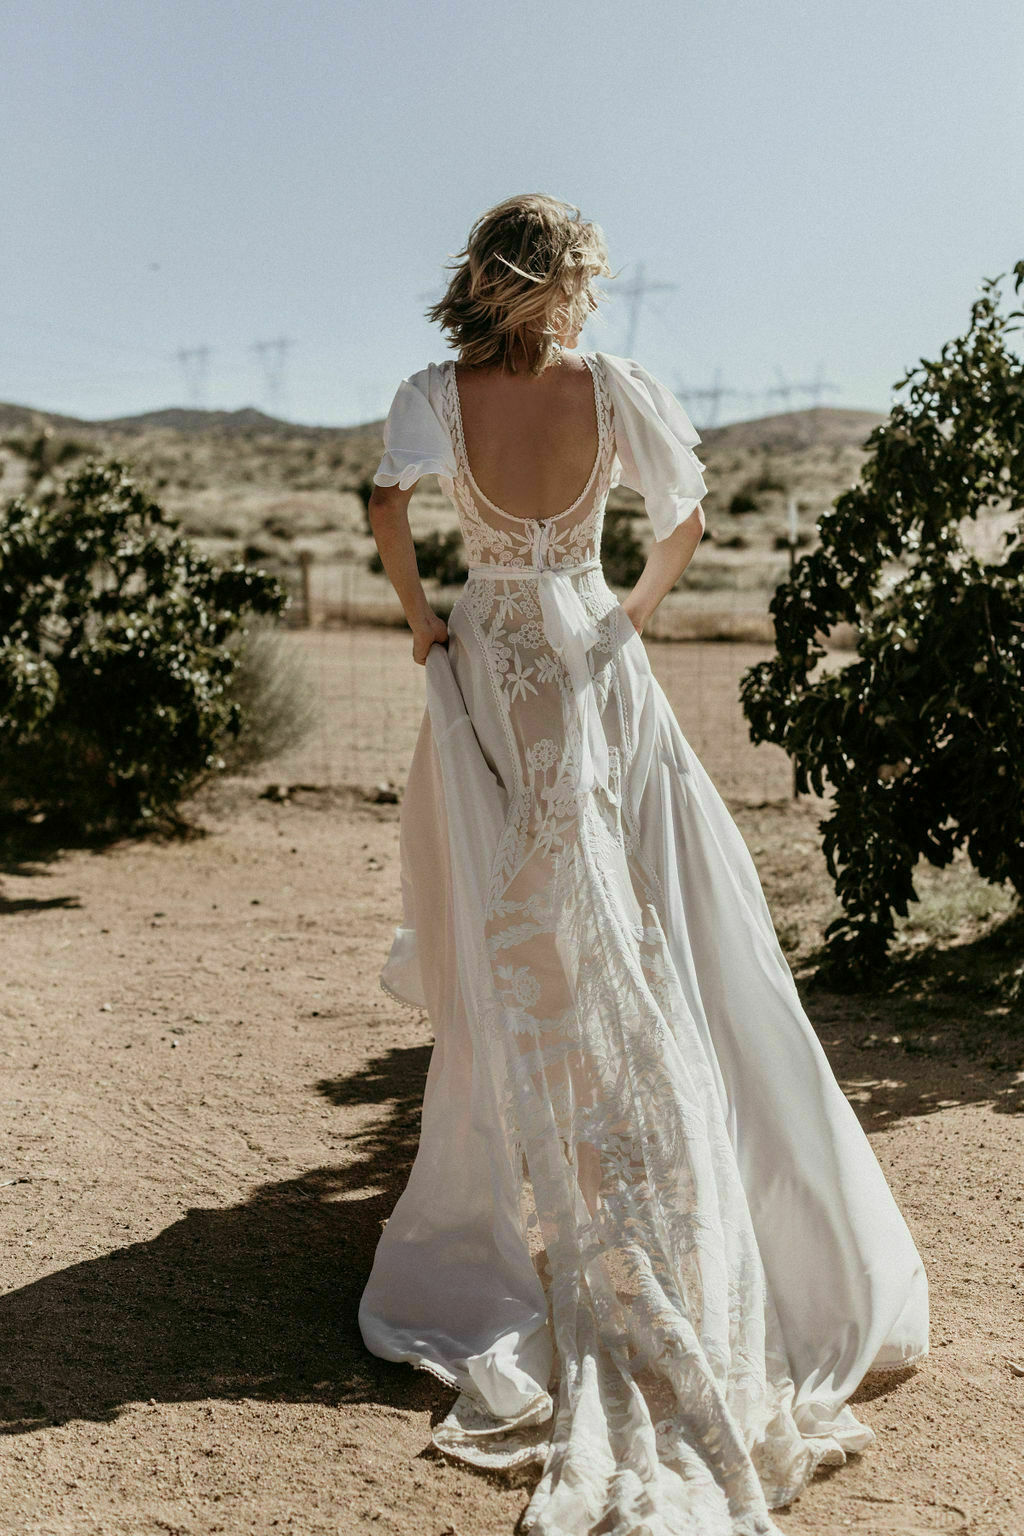 & Bohemian Lace Wedding Dresses | Dreamers and